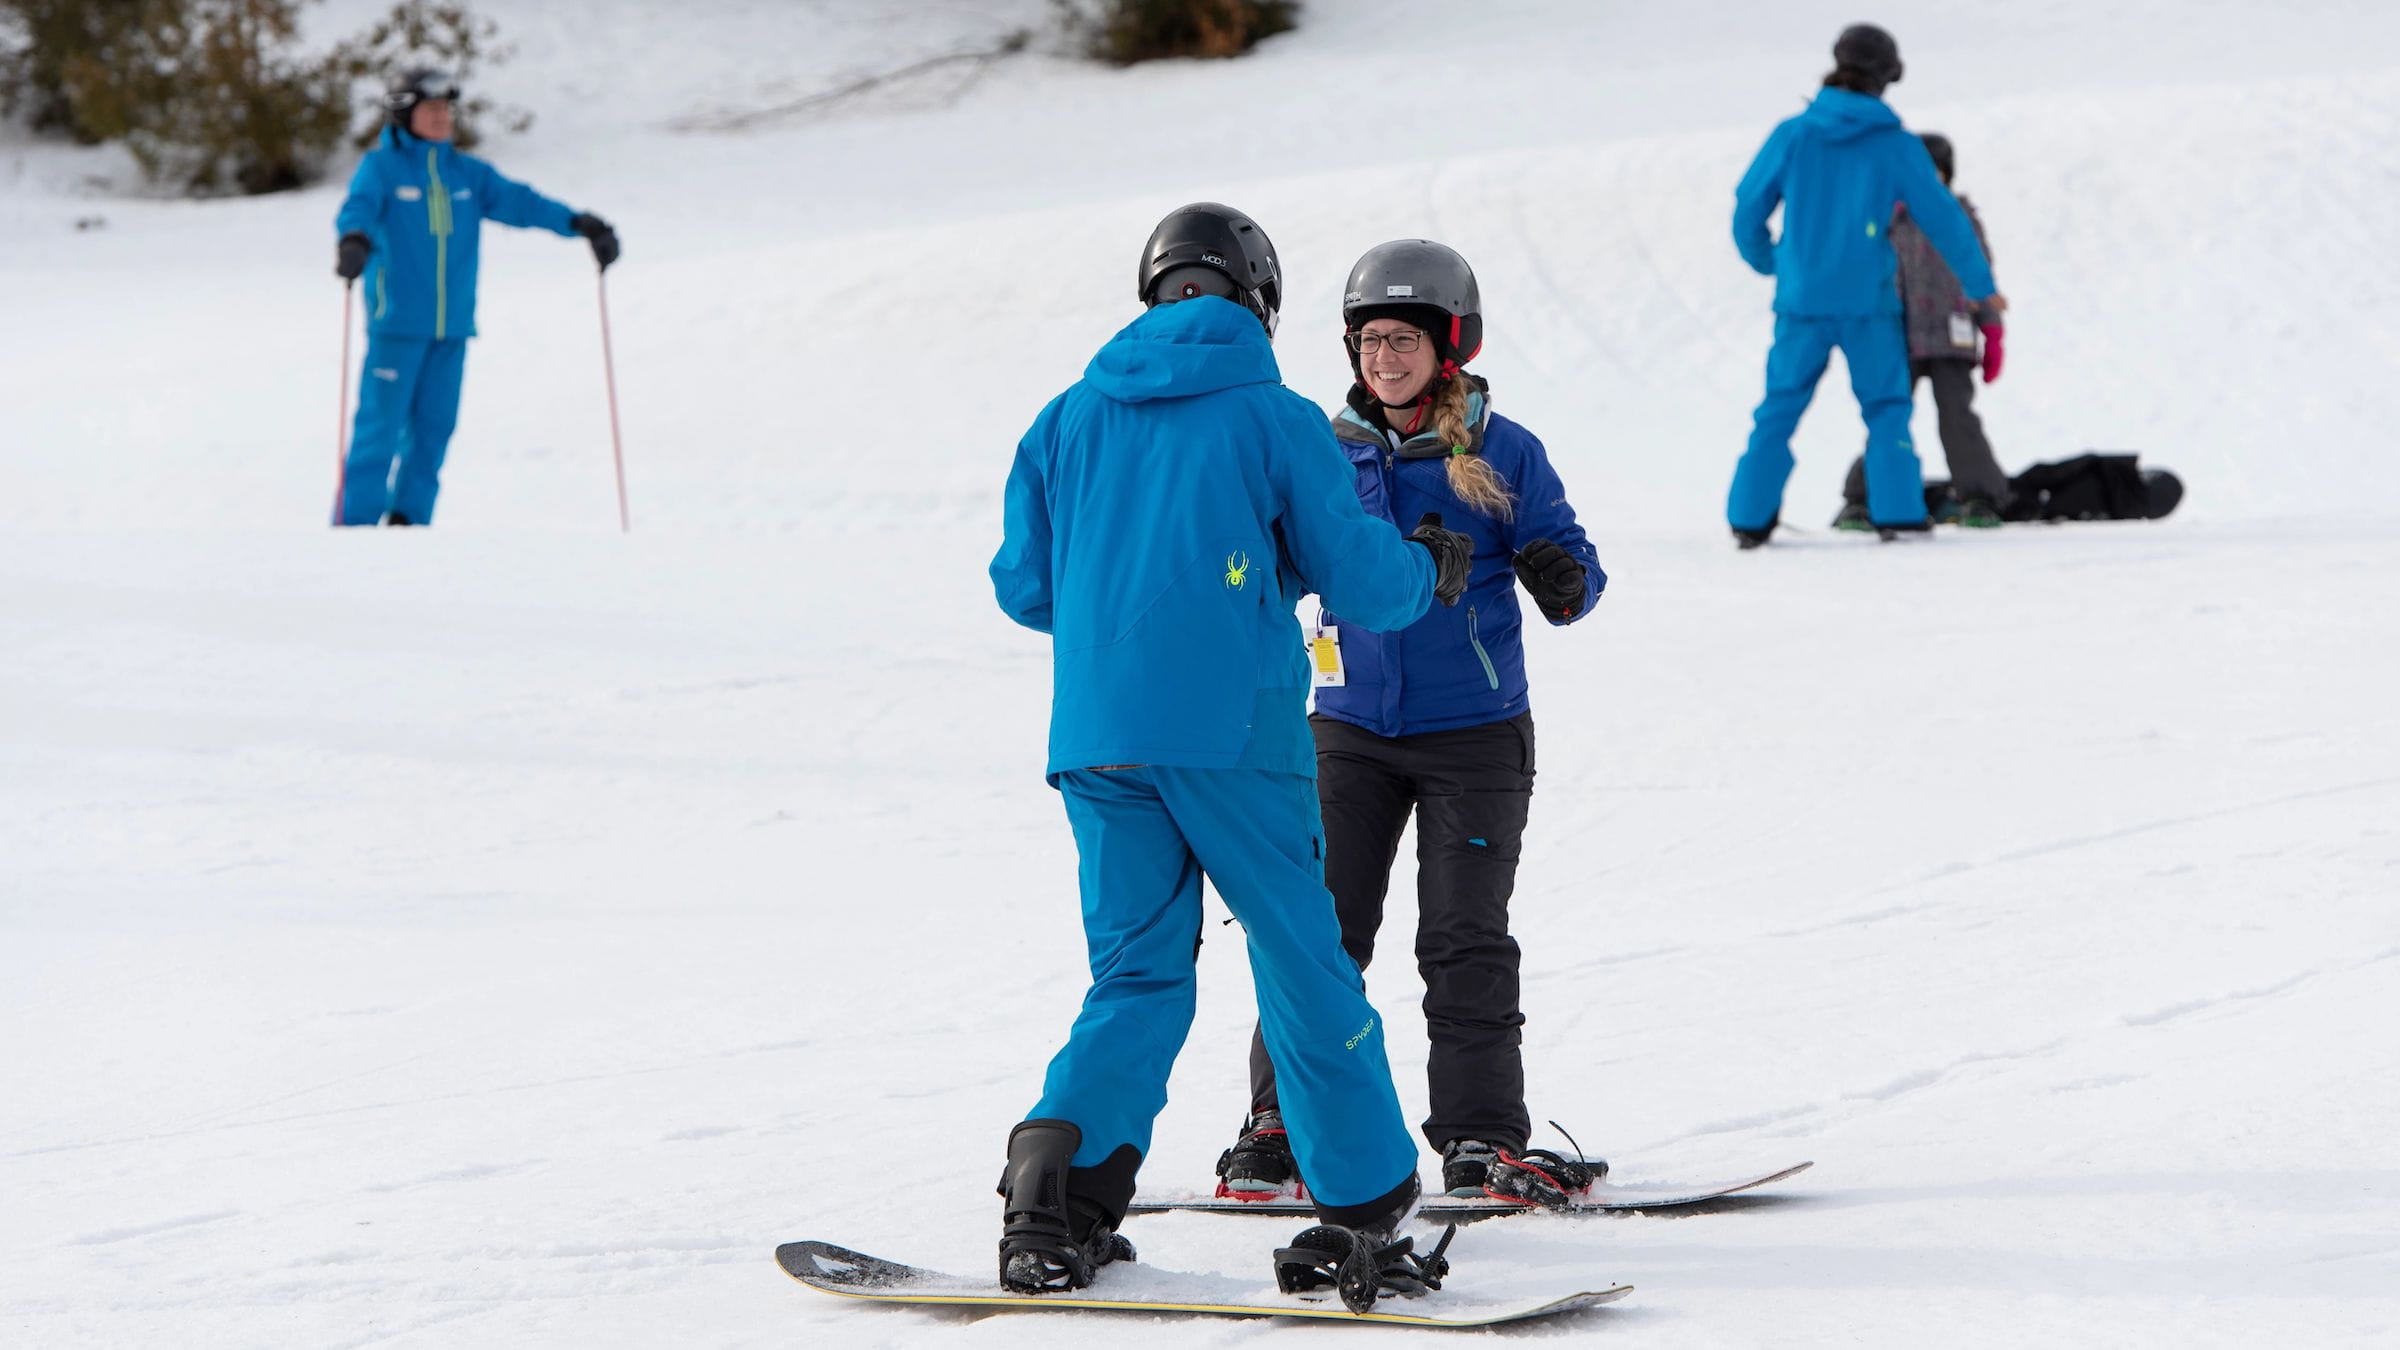 New skier with instructor during Private Snowboard Lessons at Blue Mountain